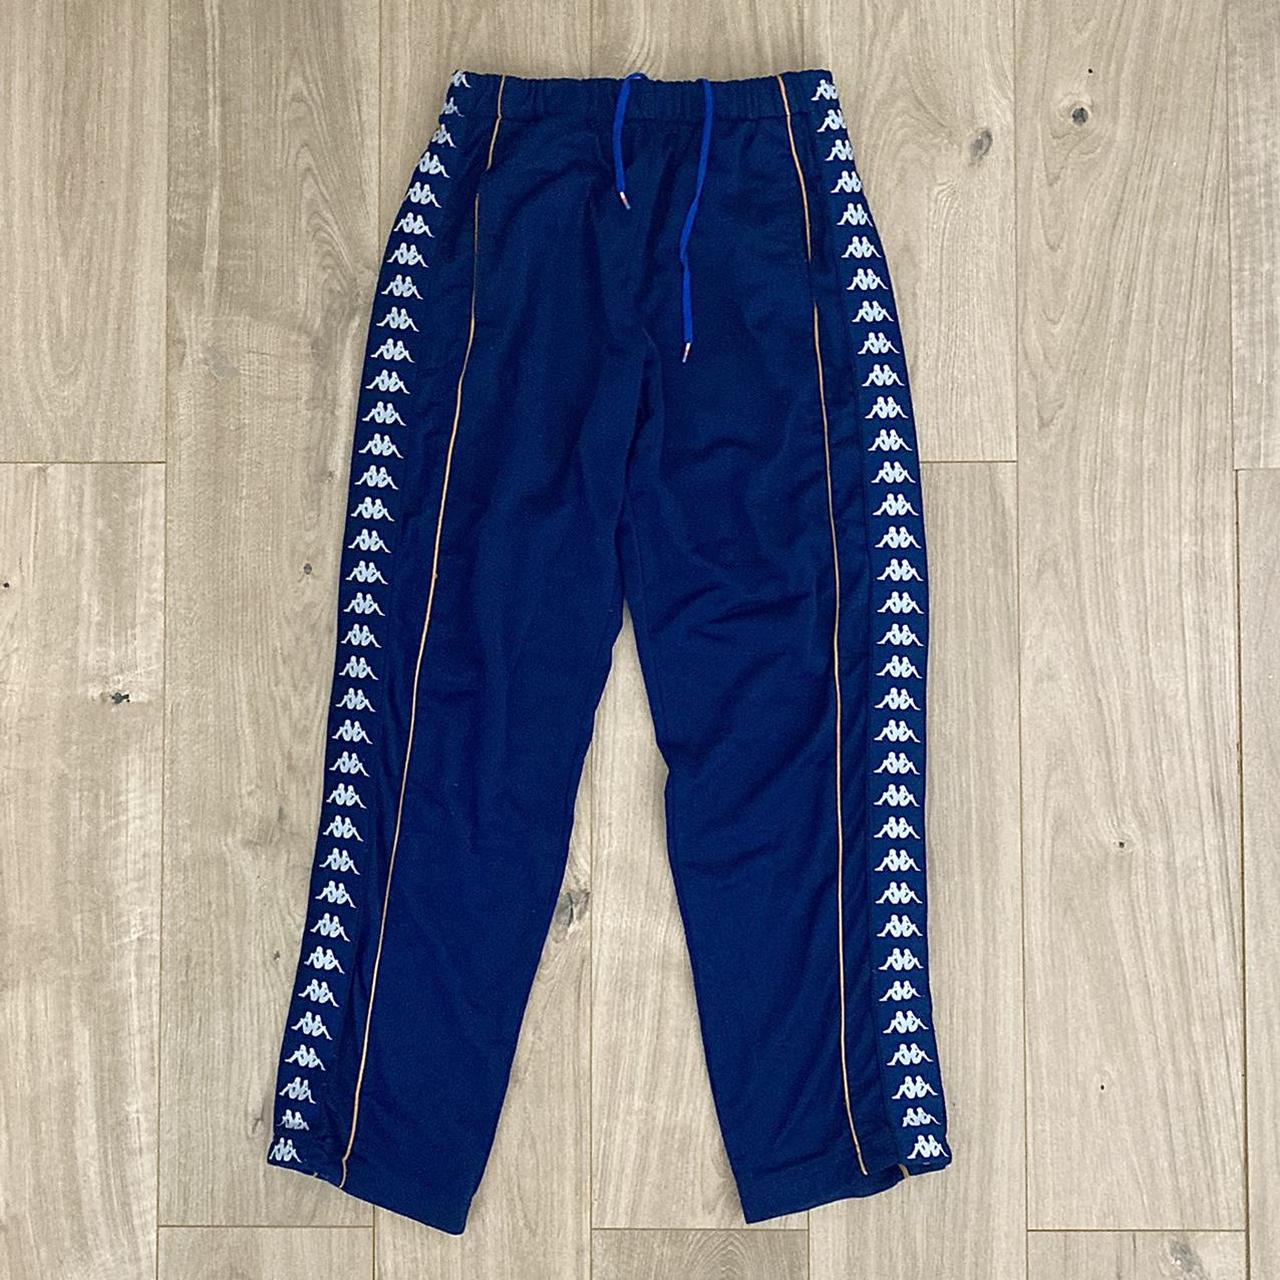 Vintage Kappa tracksuit bottoms, length from top to... - Depop